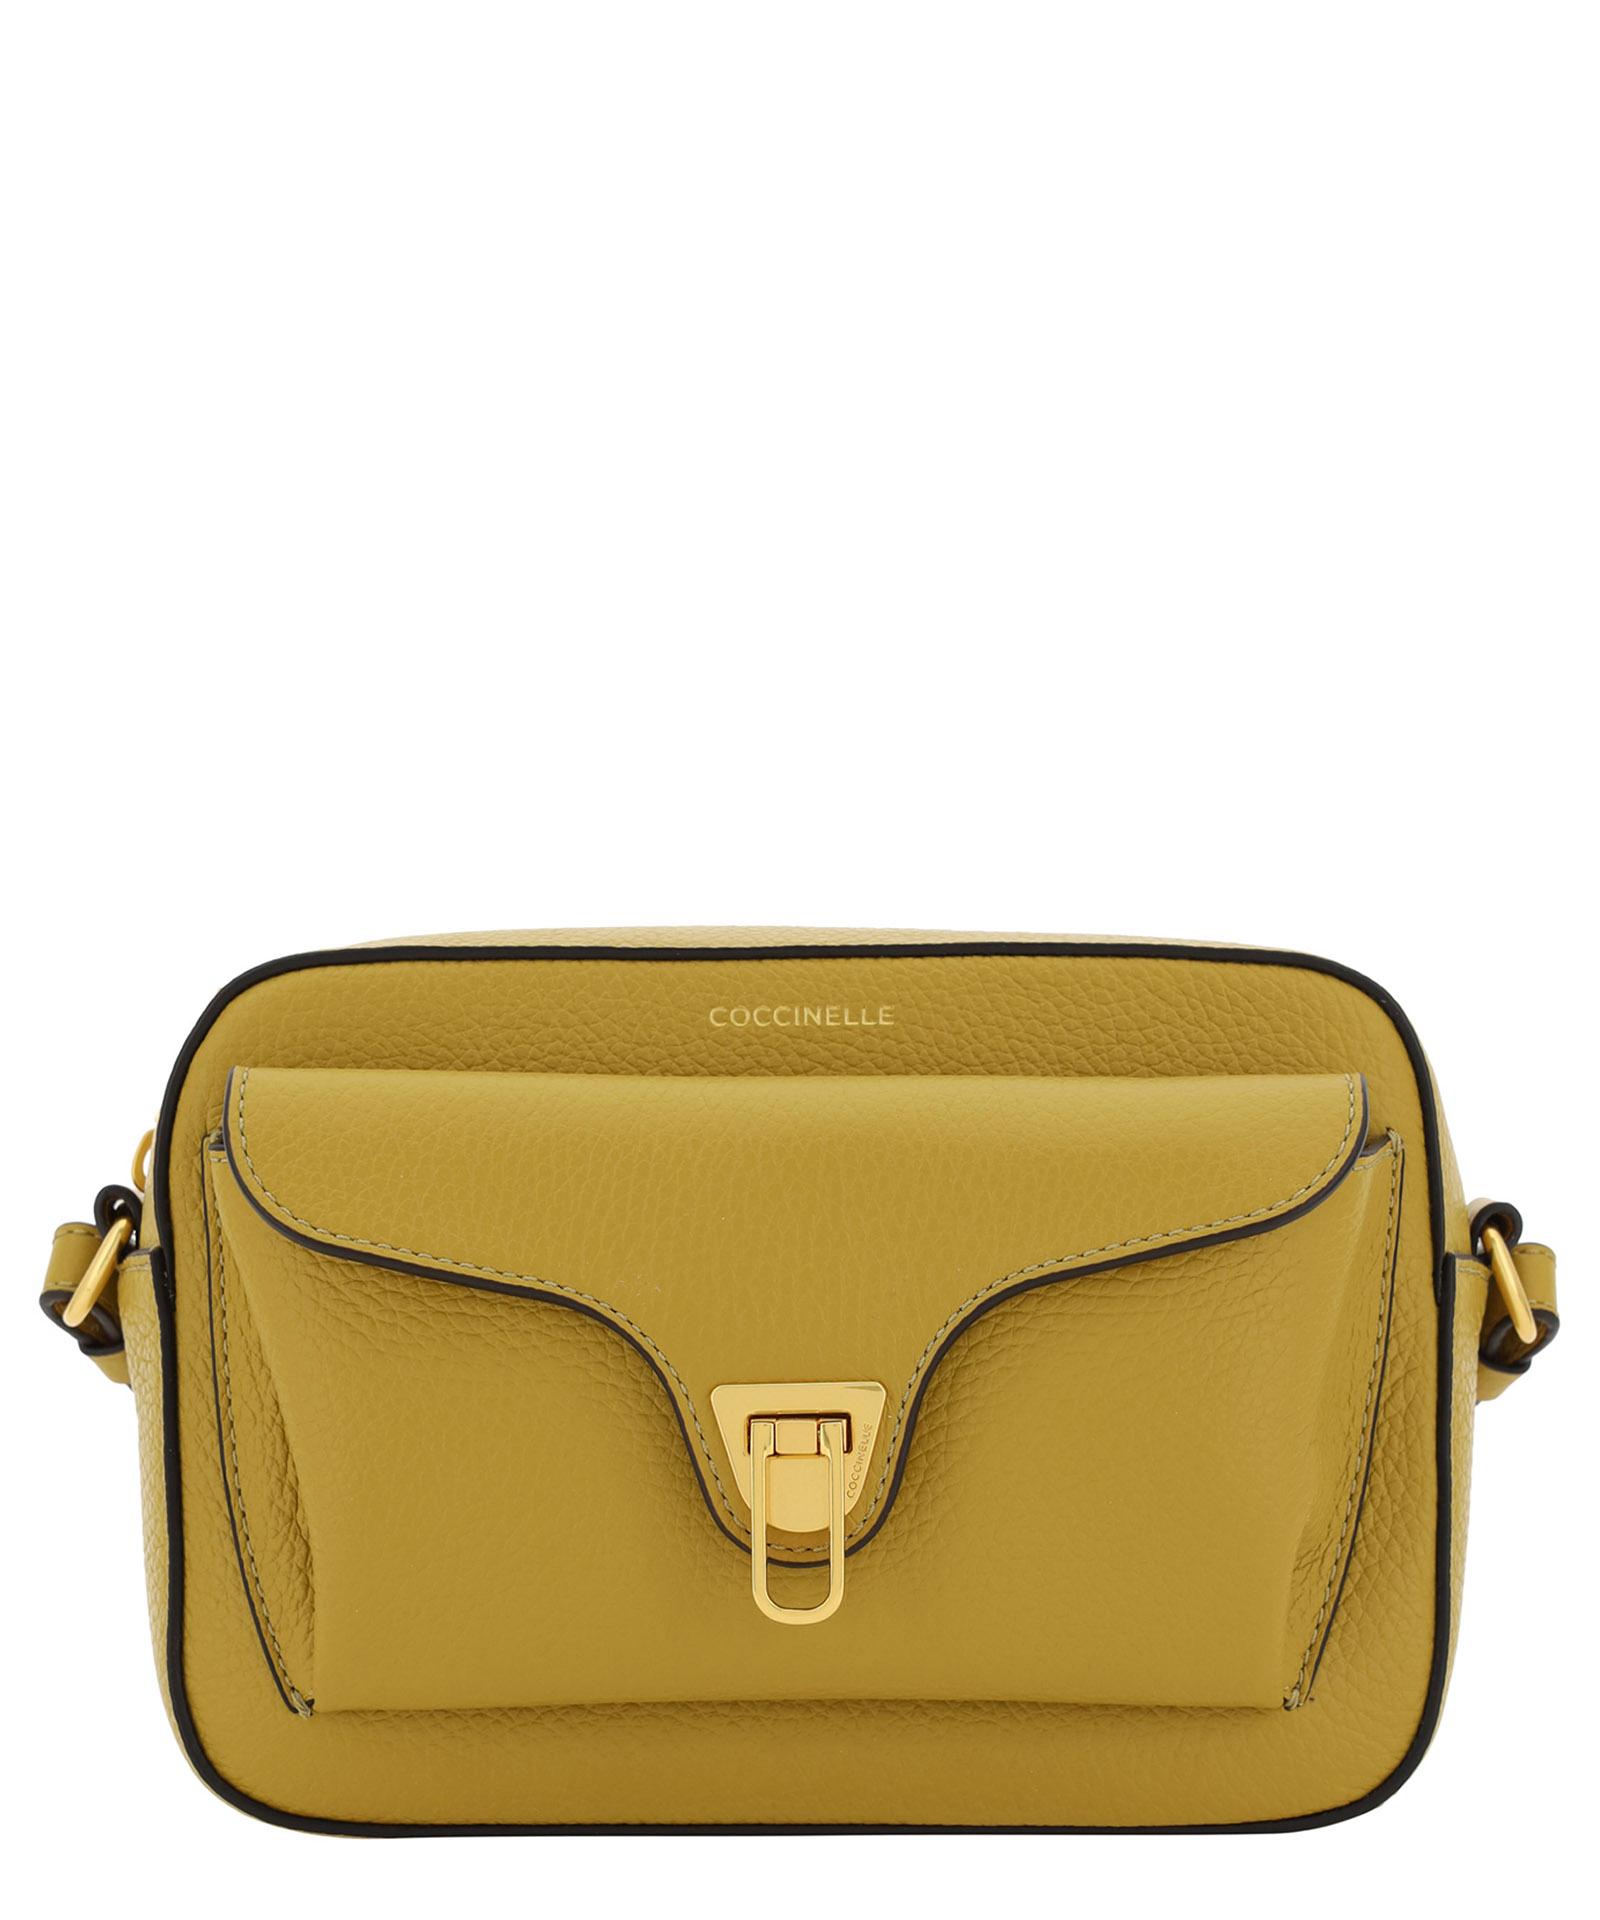 Coccinelle Beat Soft Shoulder Bag in Yellow | Lyst